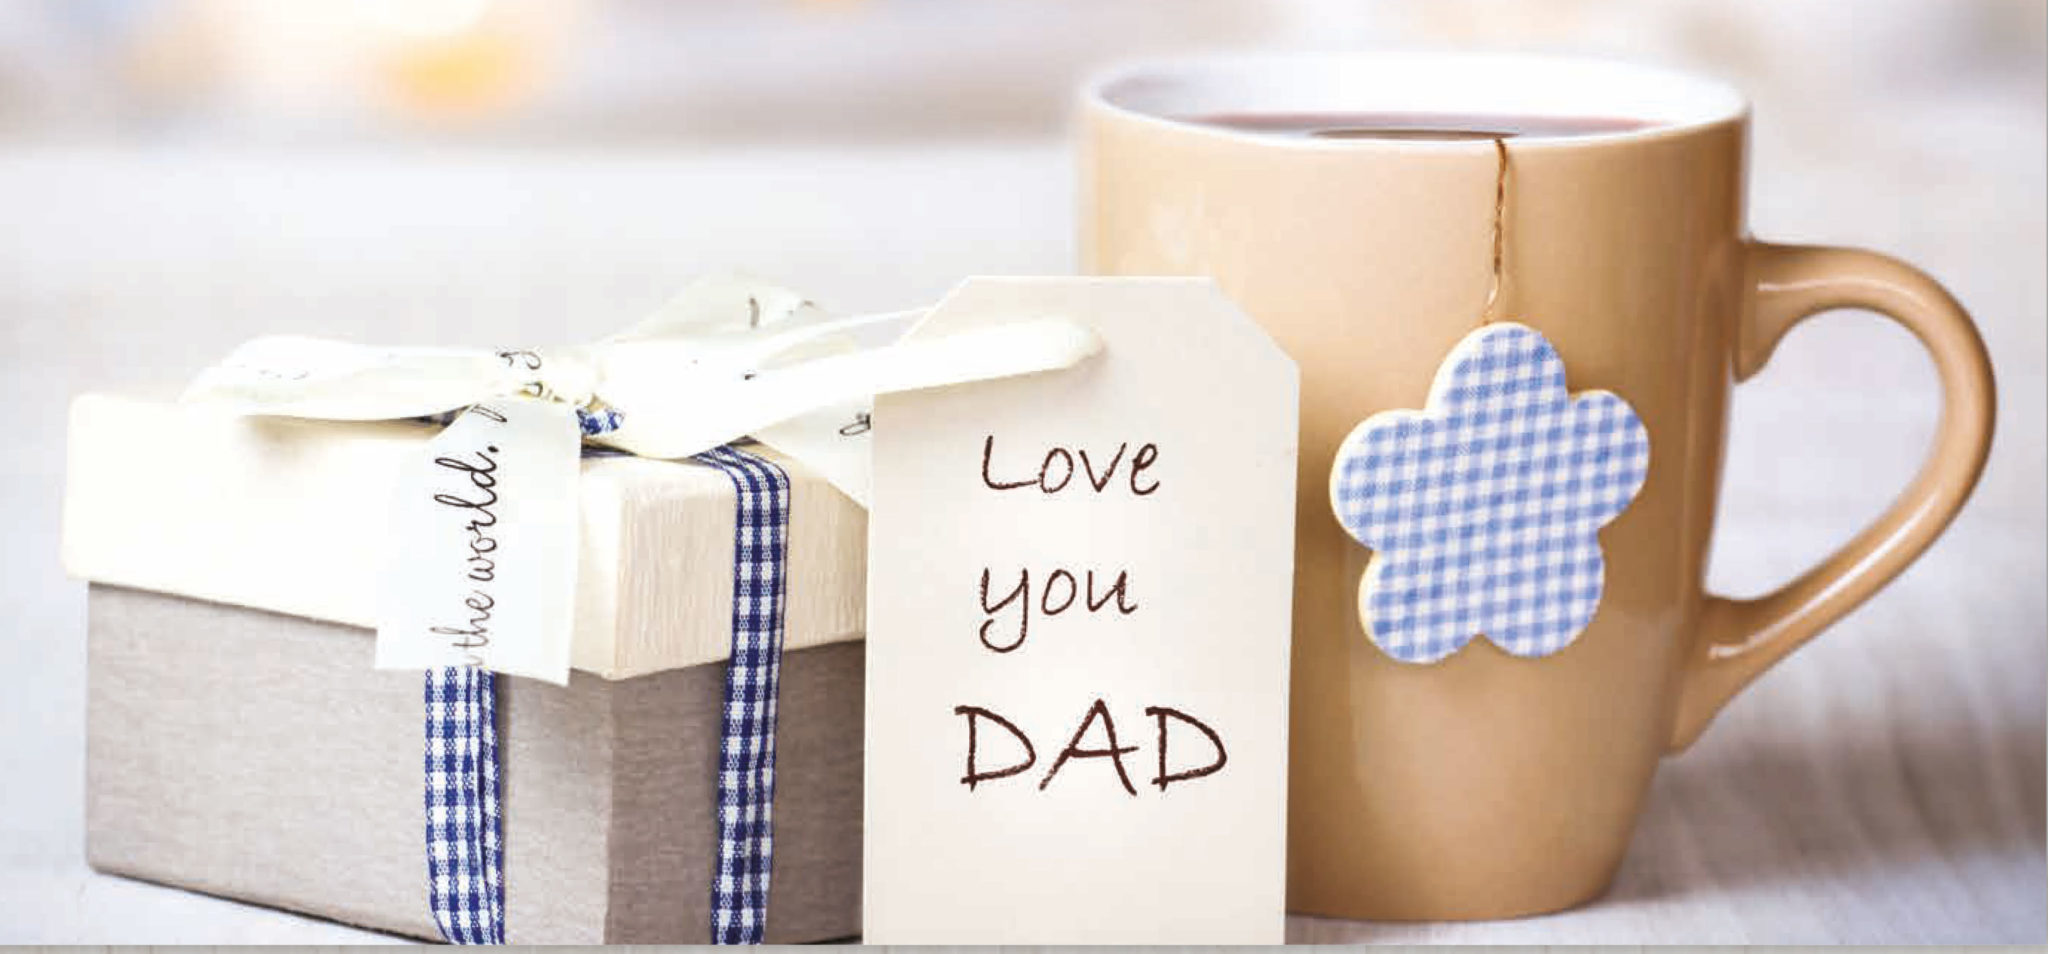 What is the best gift your father had given you?